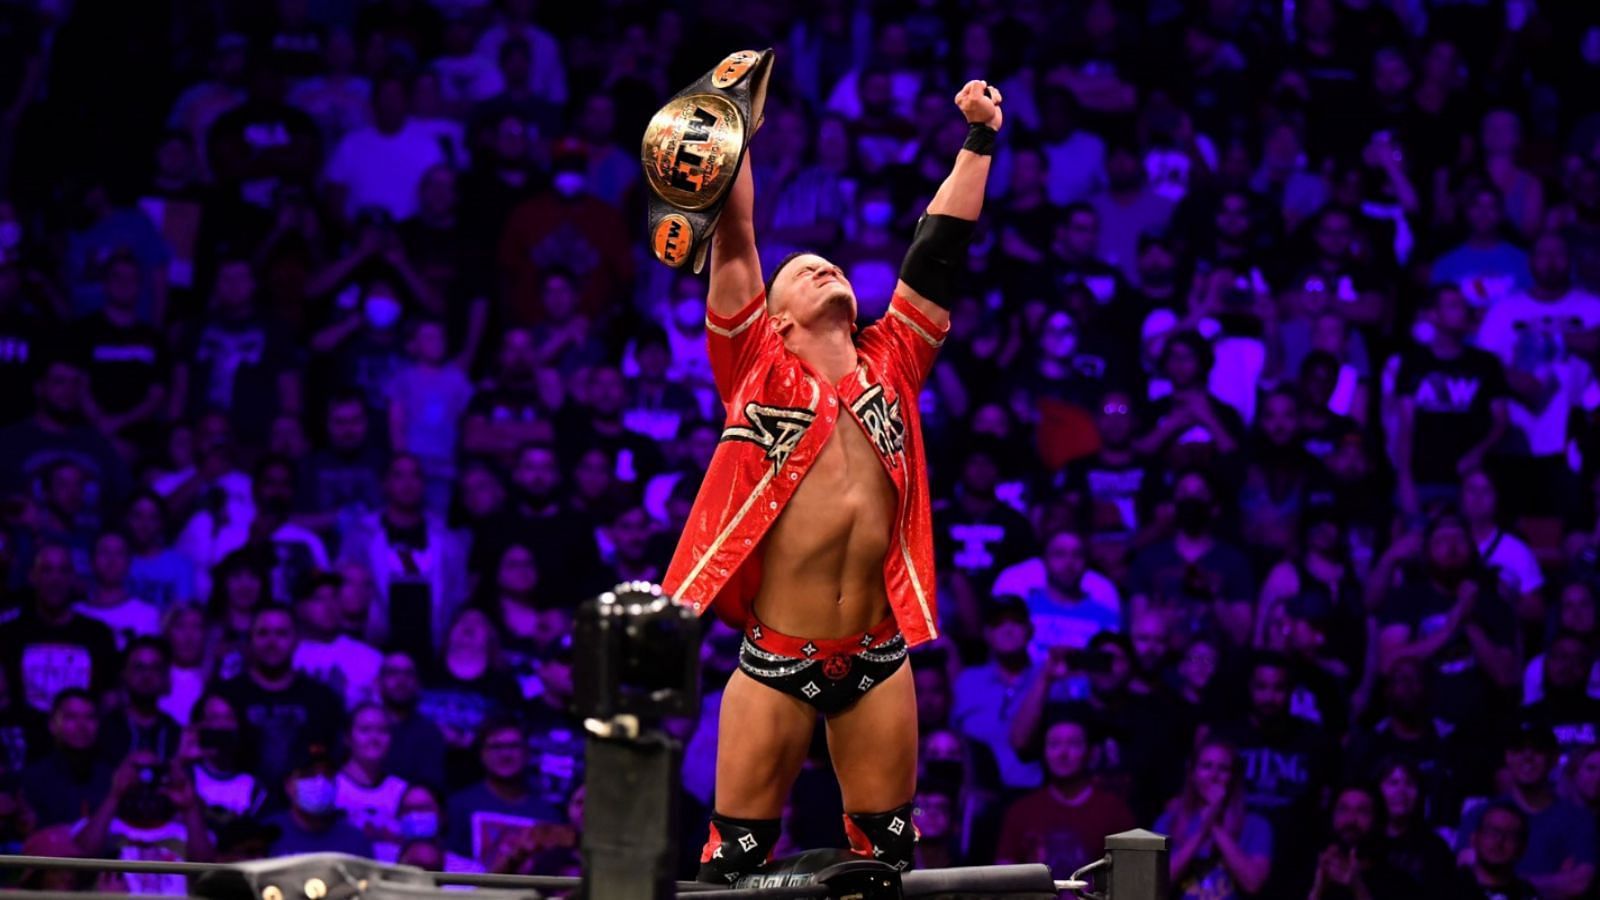 Starks successfully defended his FTW Championship.